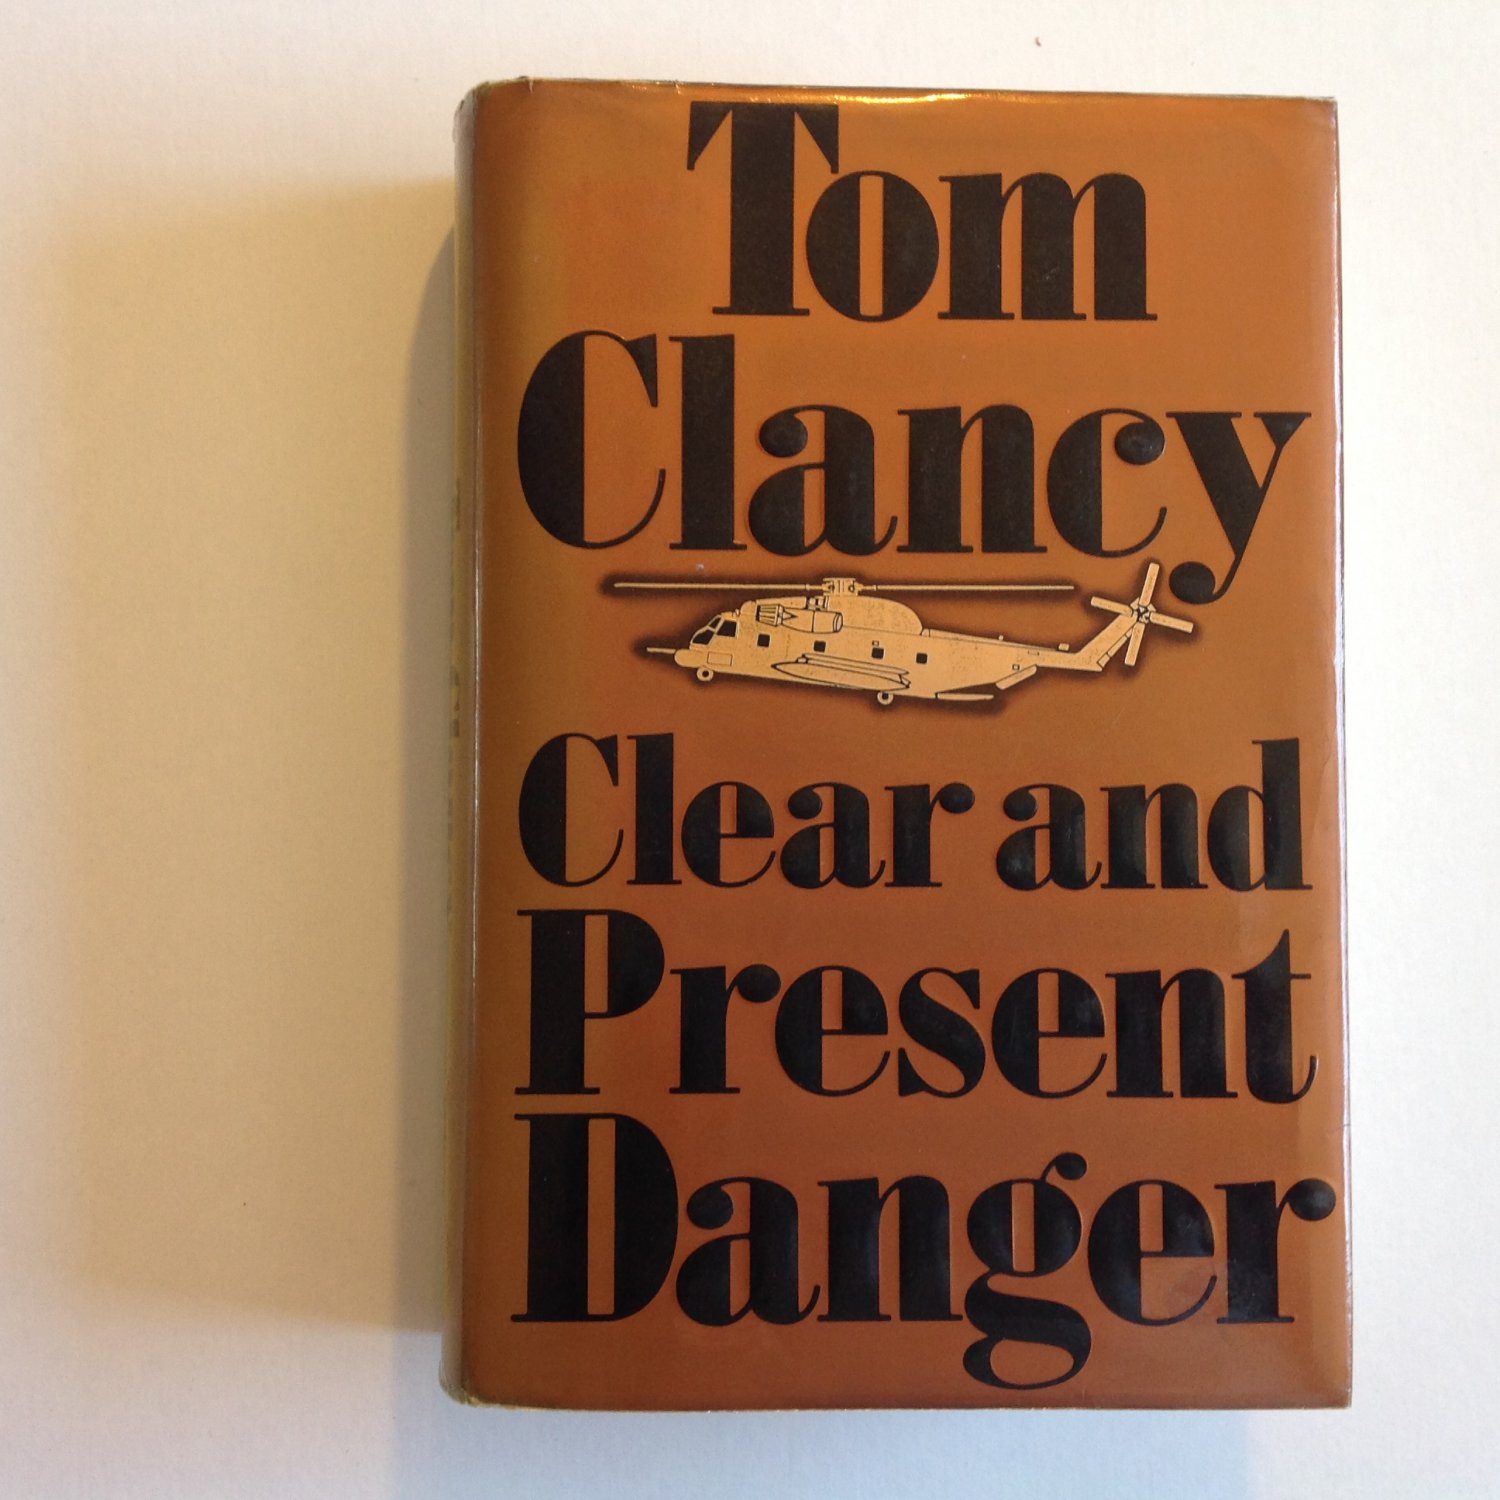 clear and present danger by tom clancy